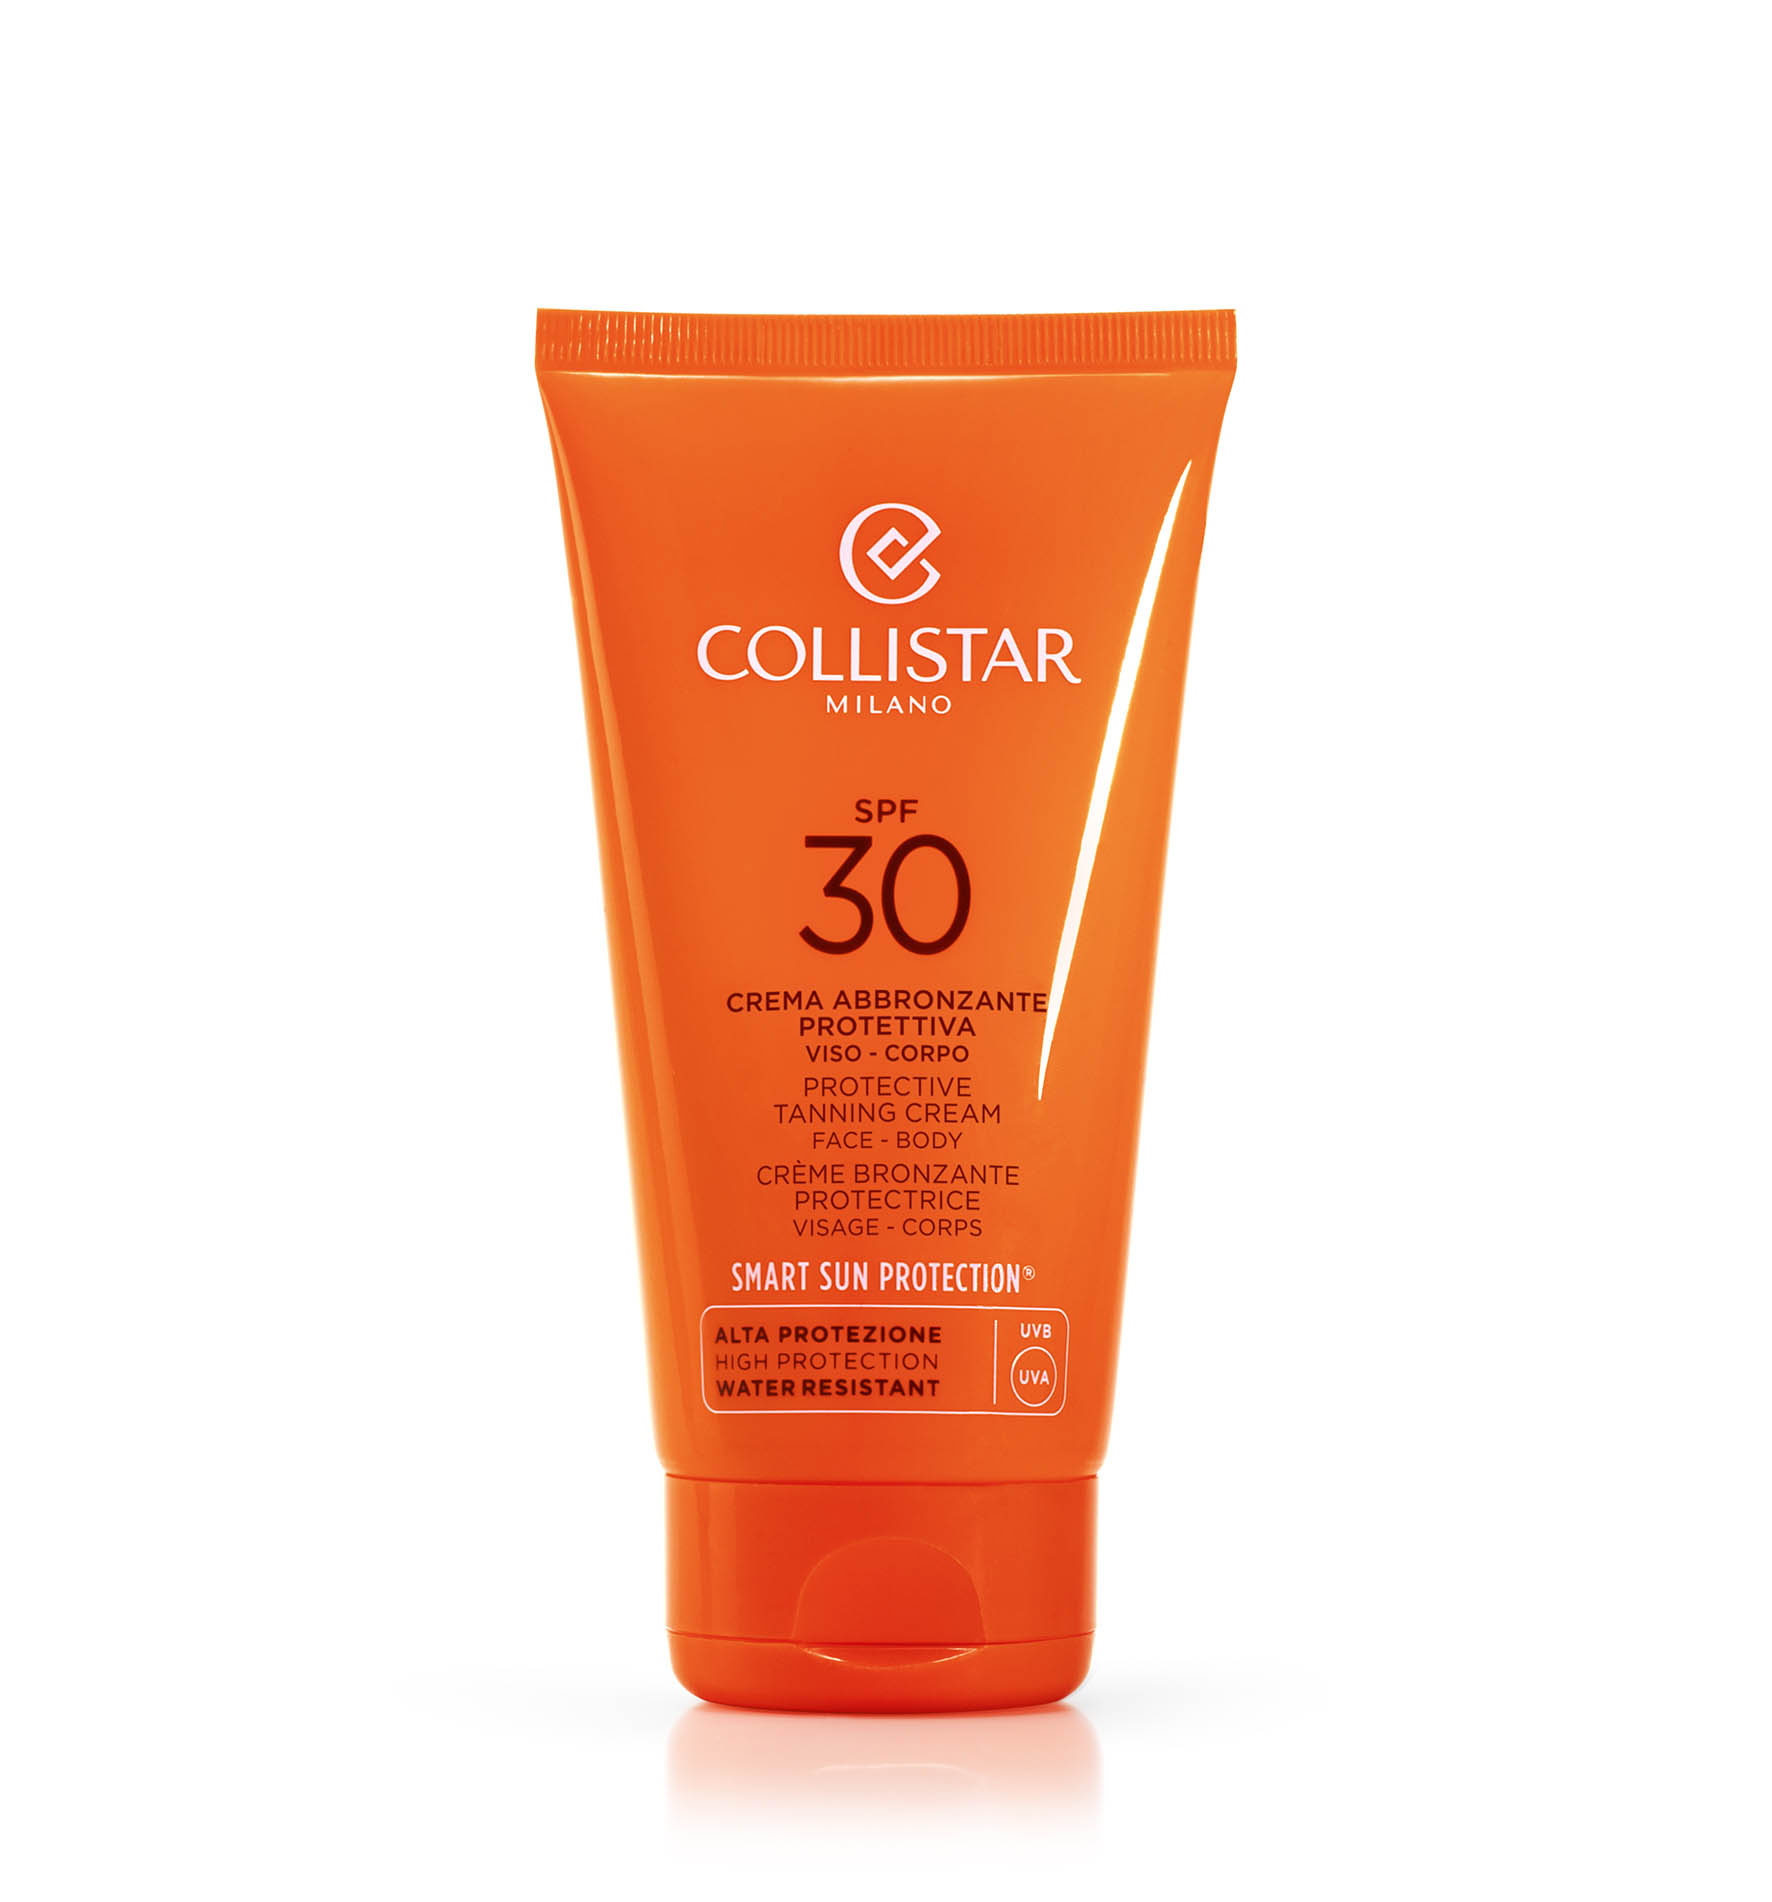 ULTRA PROTECTION TANNING CREAM FACE - BODY SPF 30 - NIEUW | Collistar - Shop Online Ufficiale